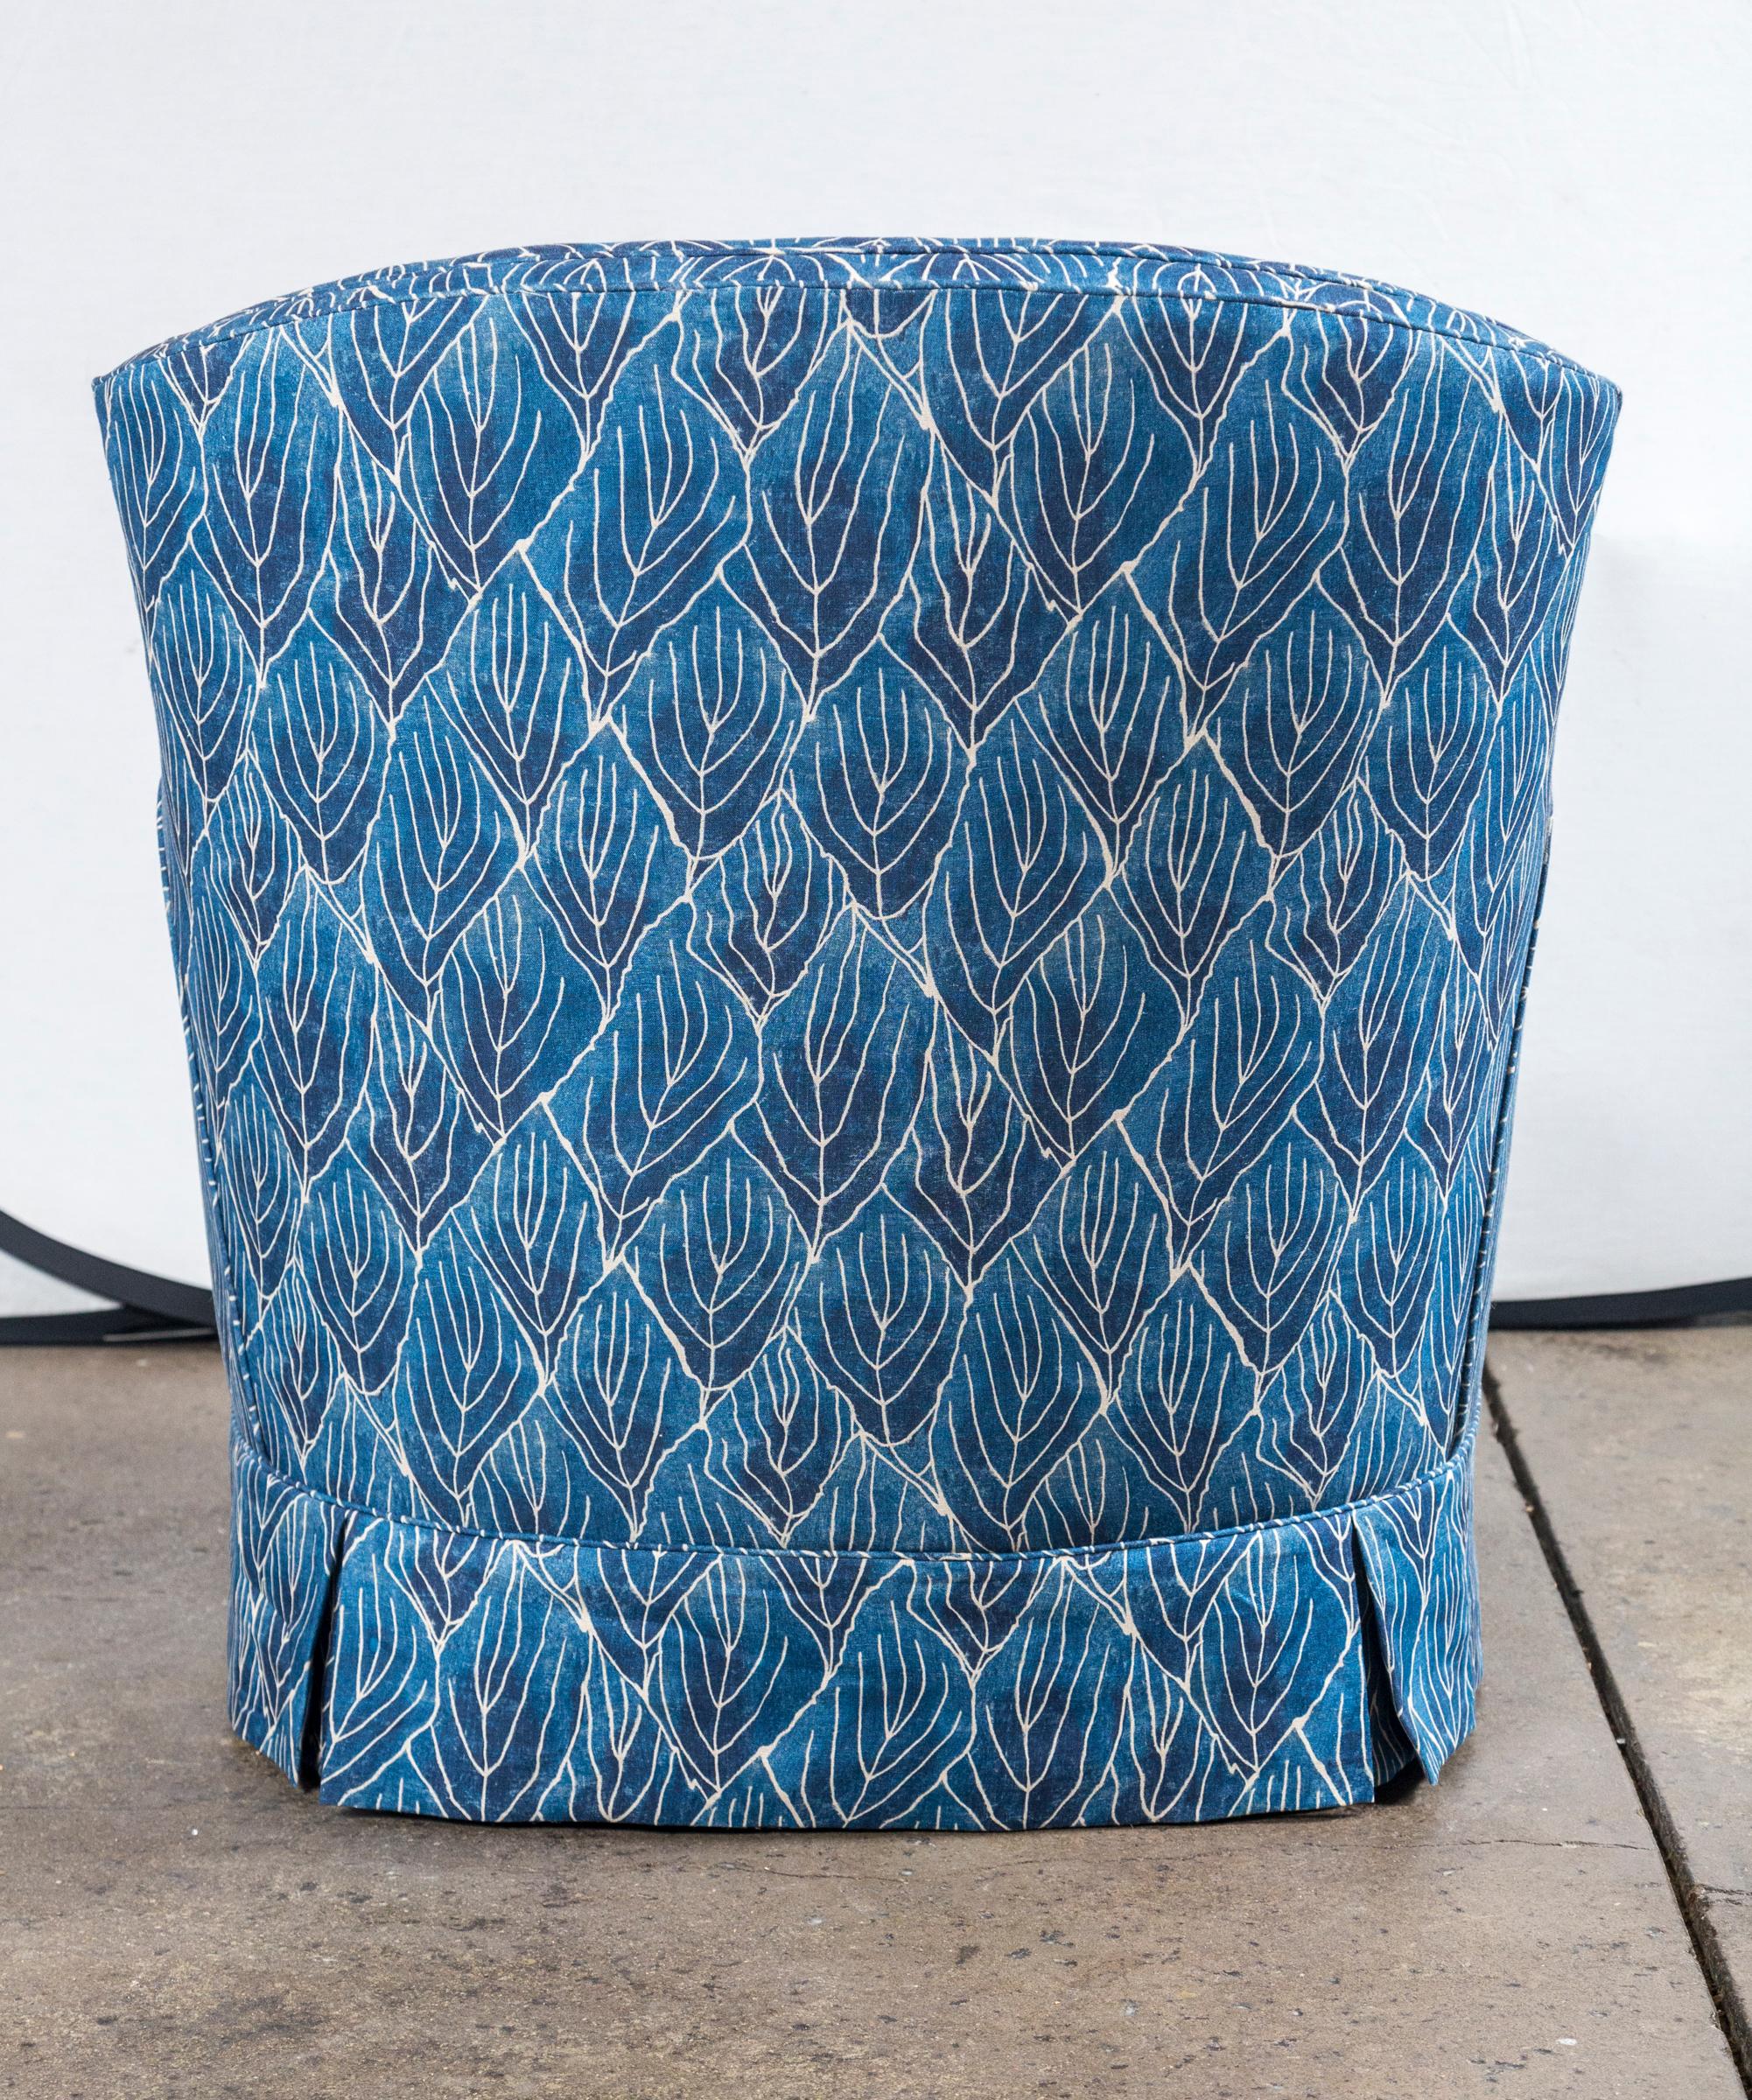 20th Century Pair of Vintage Blue Club Chairs, Newly Upholstered in Robert Kime Nara Fabric